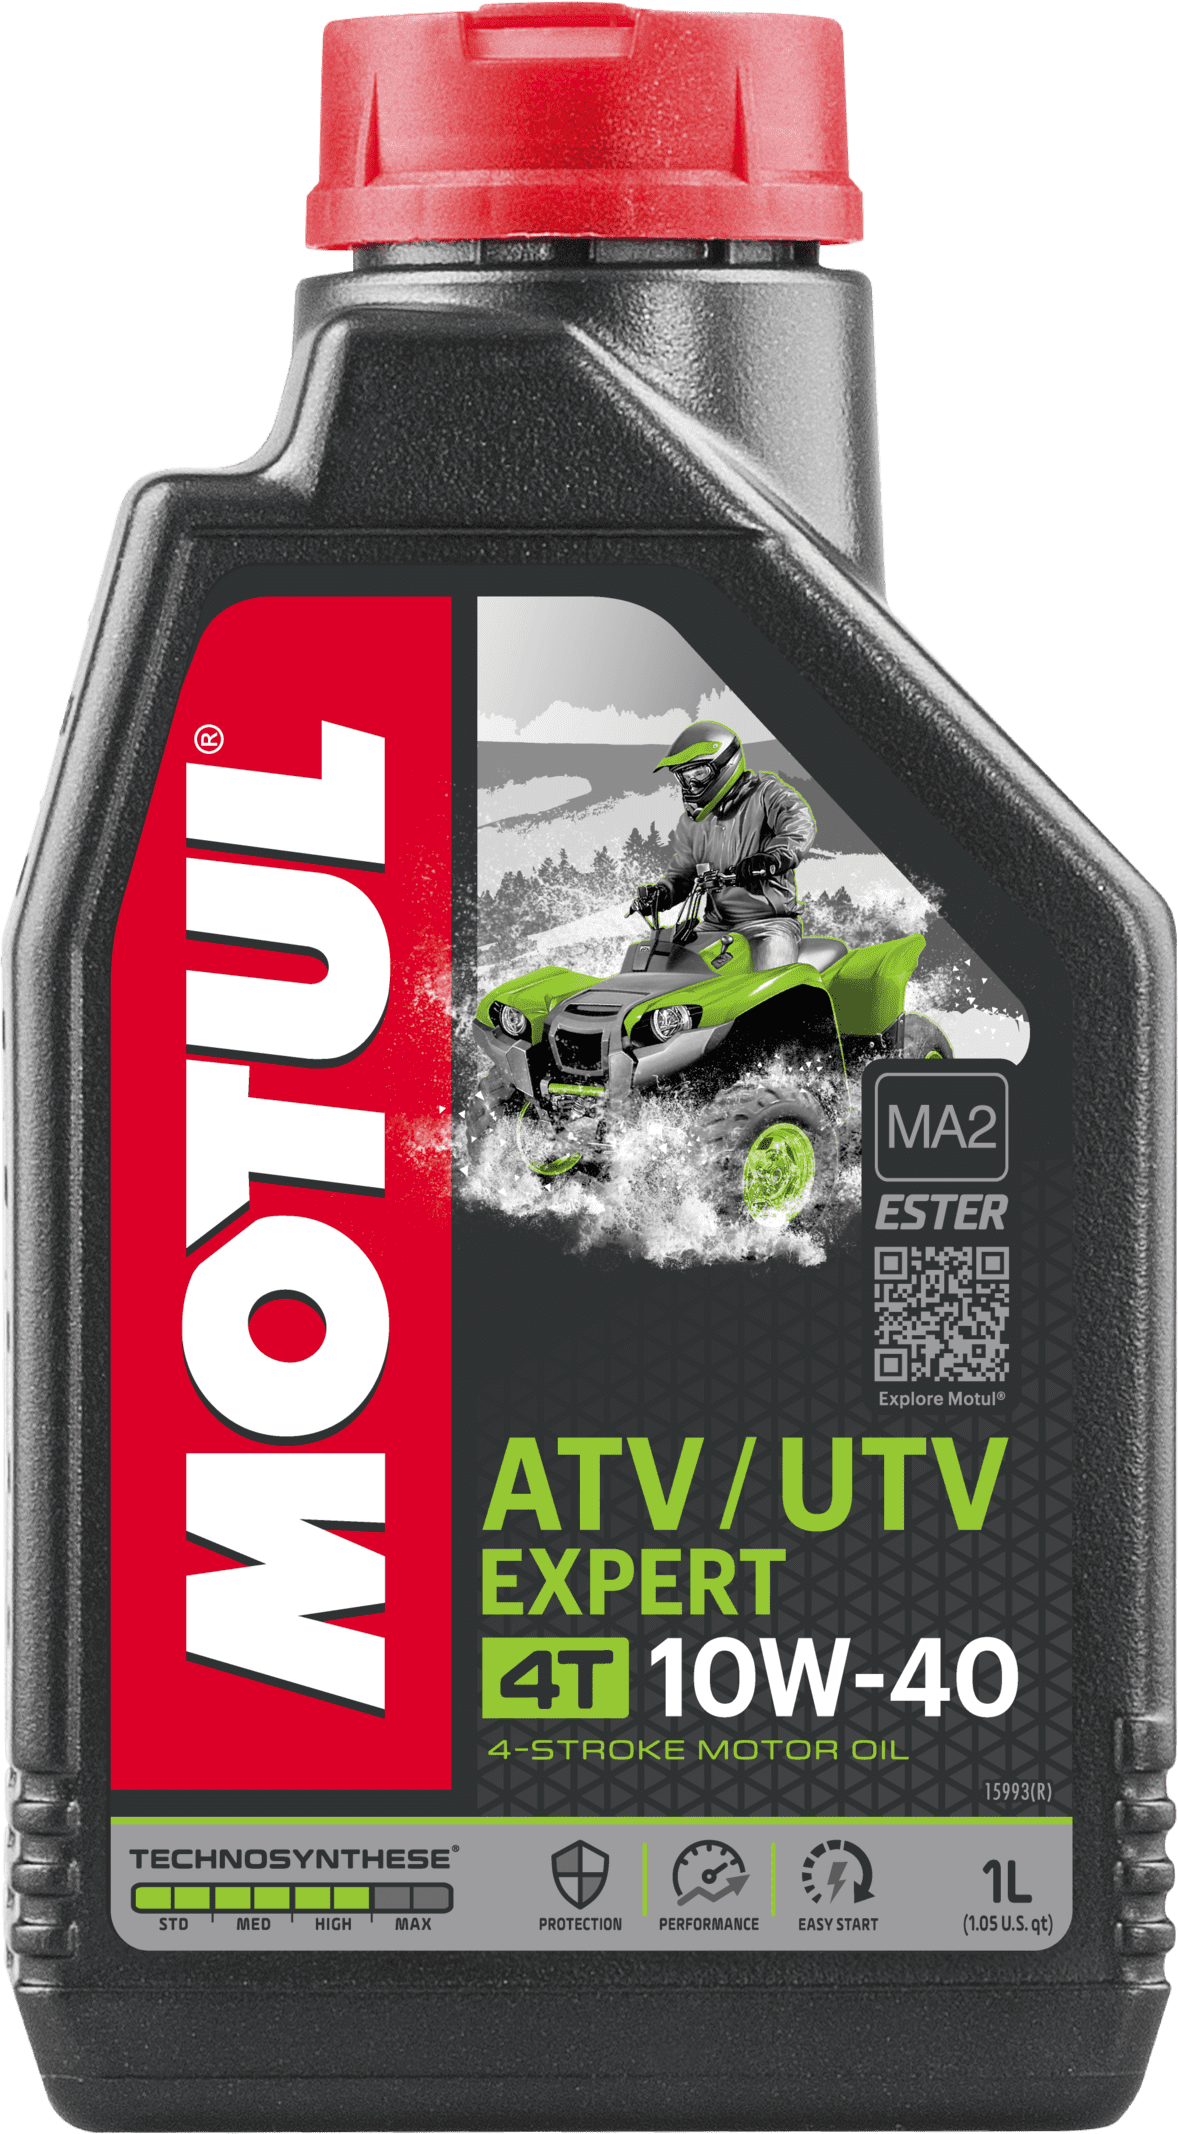 105938-1 4-stroke engine oil based on MOTUL Technosynthese® - Ester specially designed for the latest generation of 4-stroke ATVs and UTVs for both recreational and utility activities.